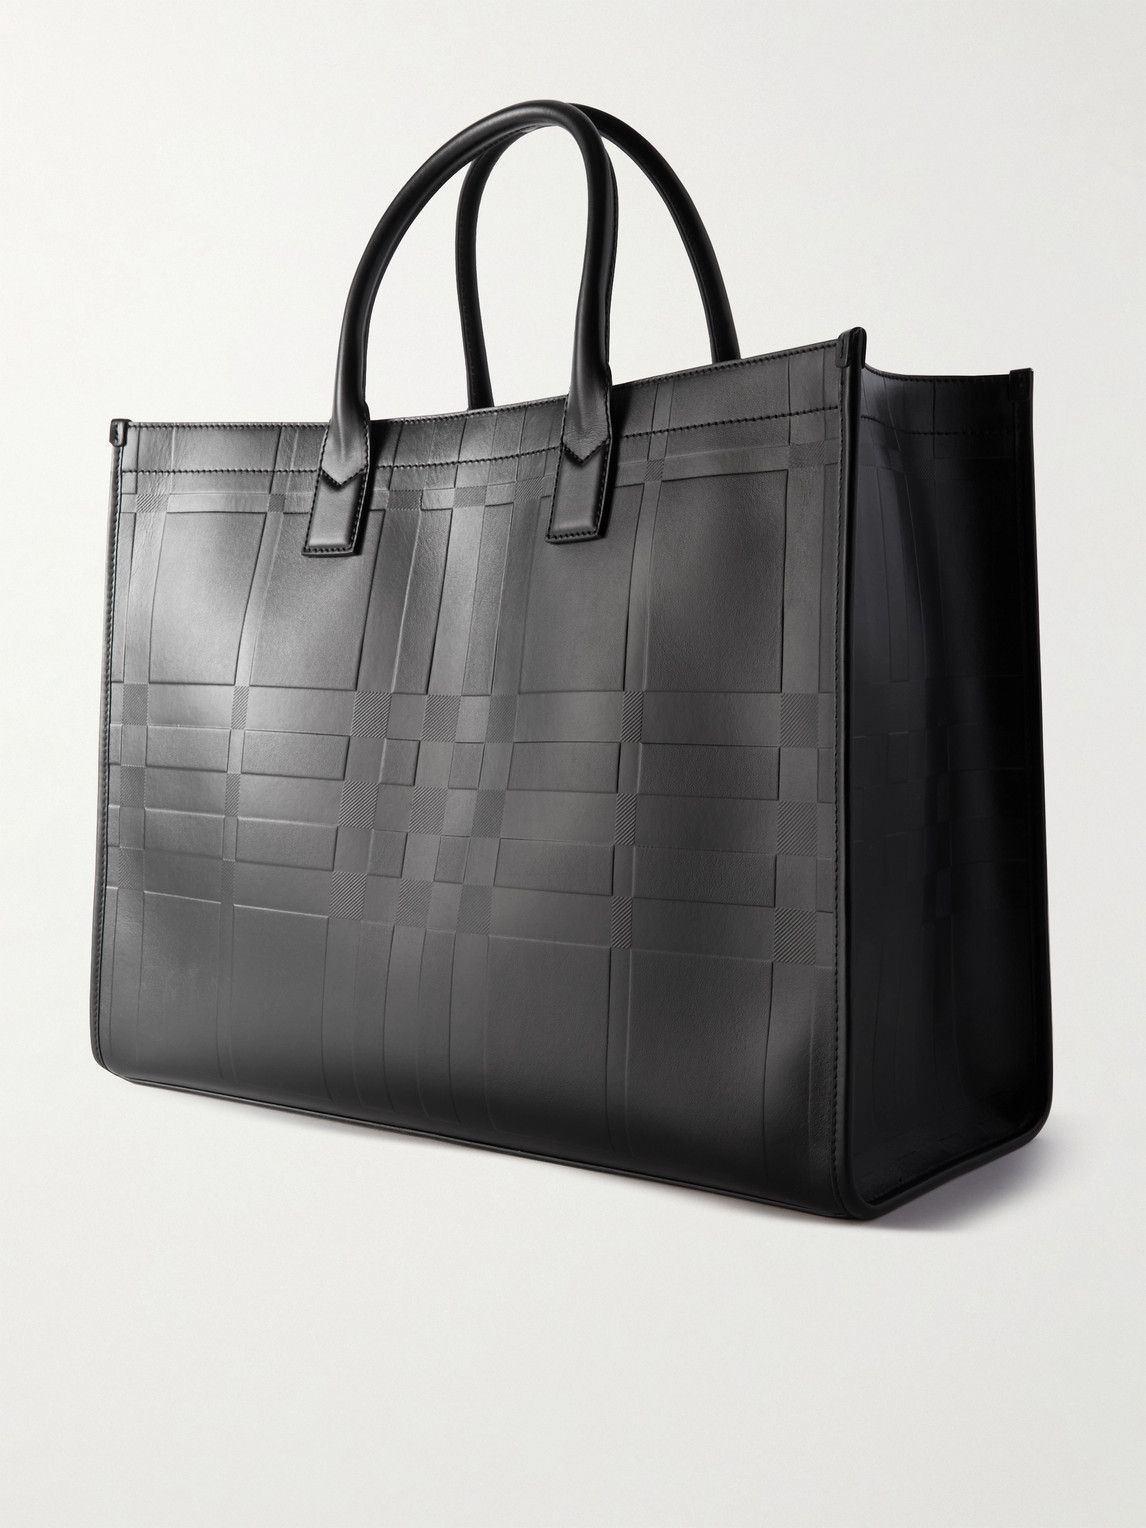 Burberry - Embossed Checked Leather Tote Bag Burberry